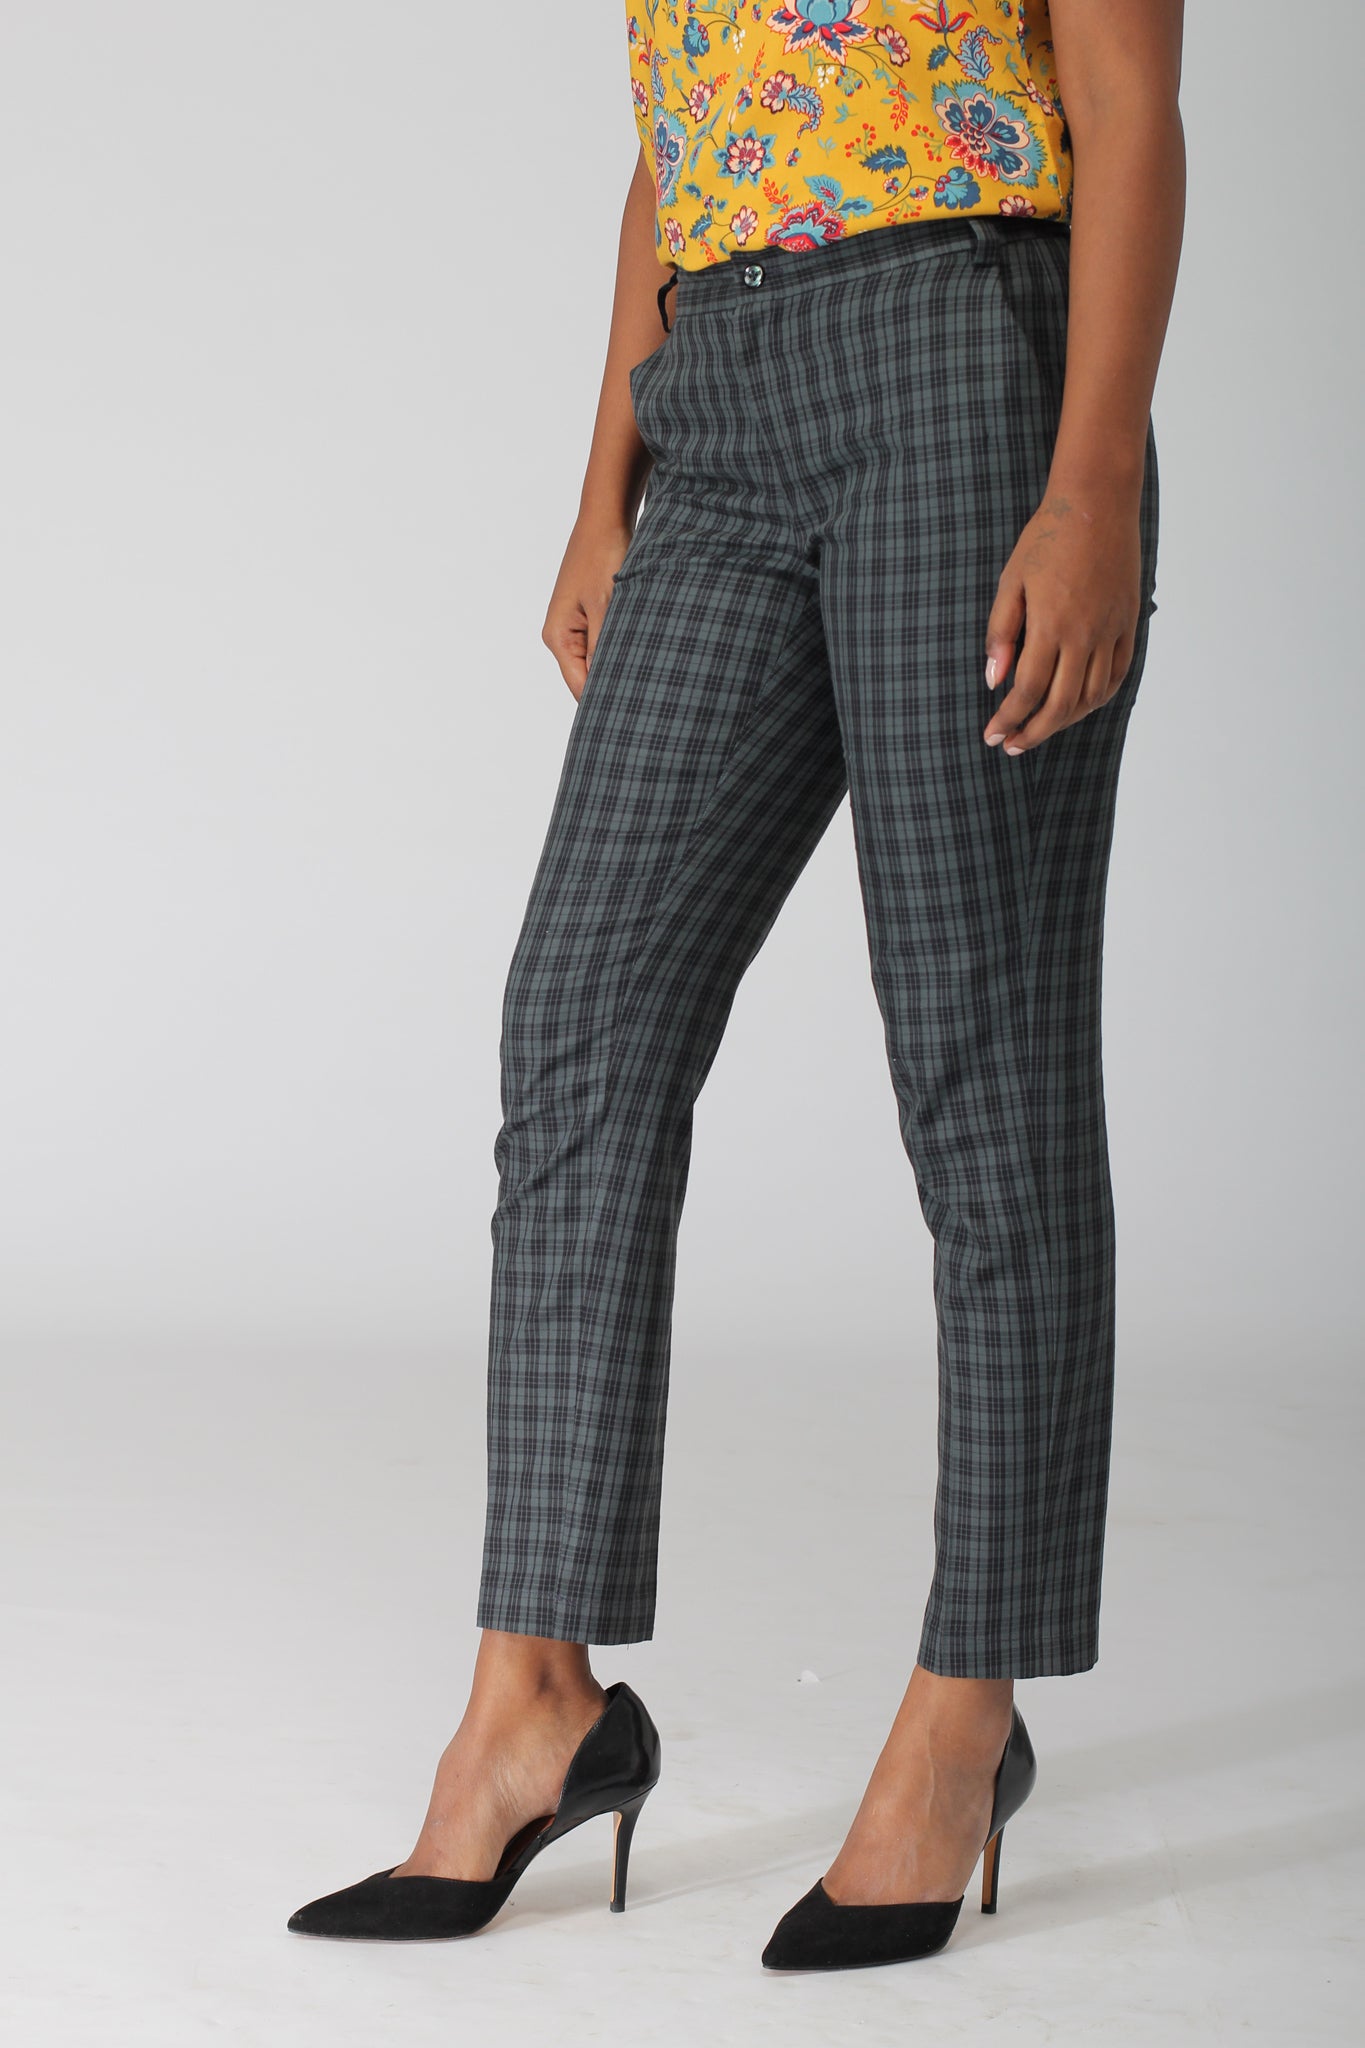 Buy Men's Cotton Check Dress Pant Stretchable Chinos Online in Pakistan